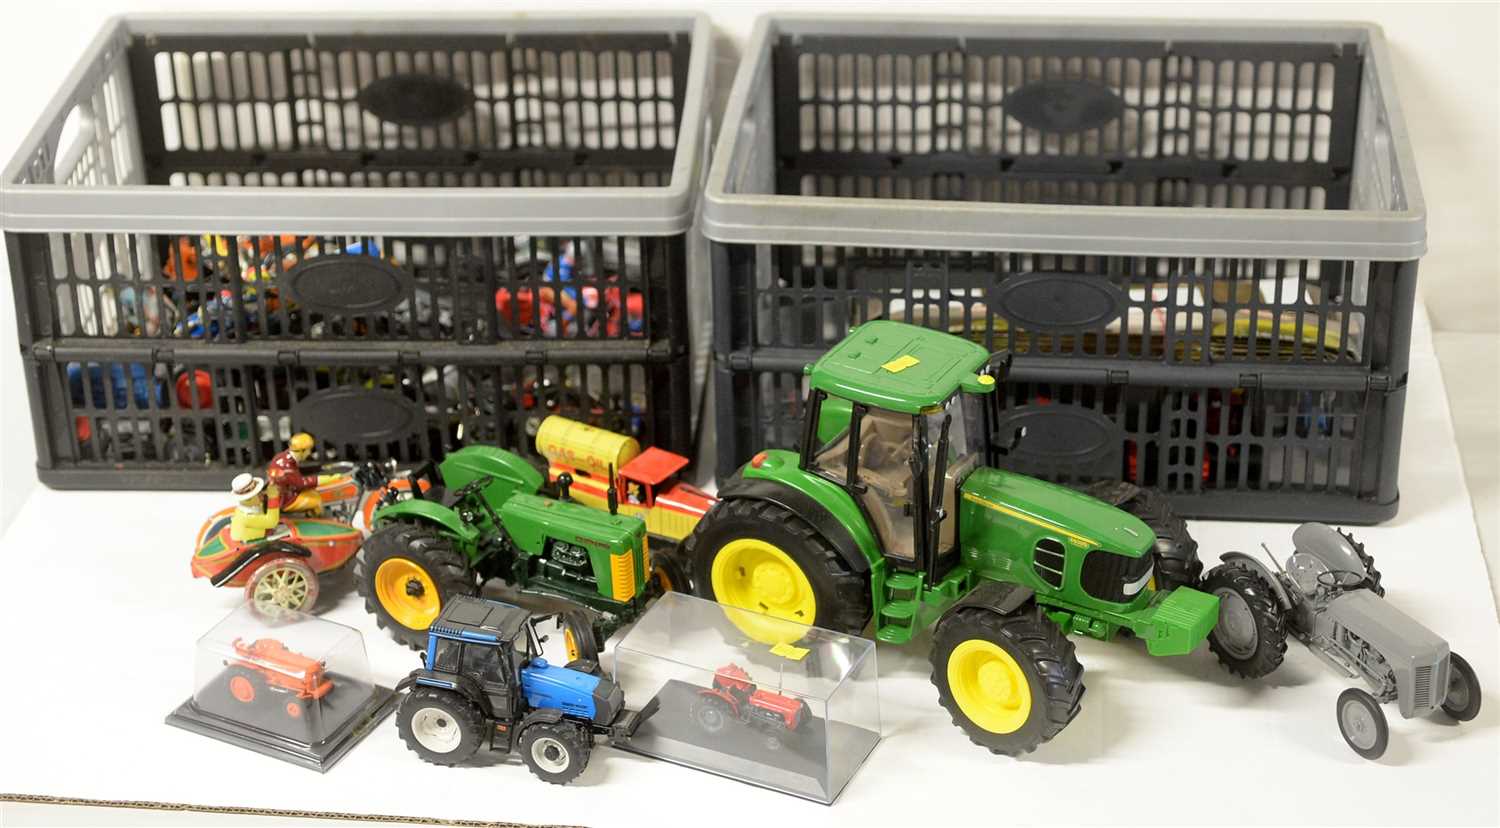 Lot 1322 - Die-cast model tractors, motor cycles and tinplate toys